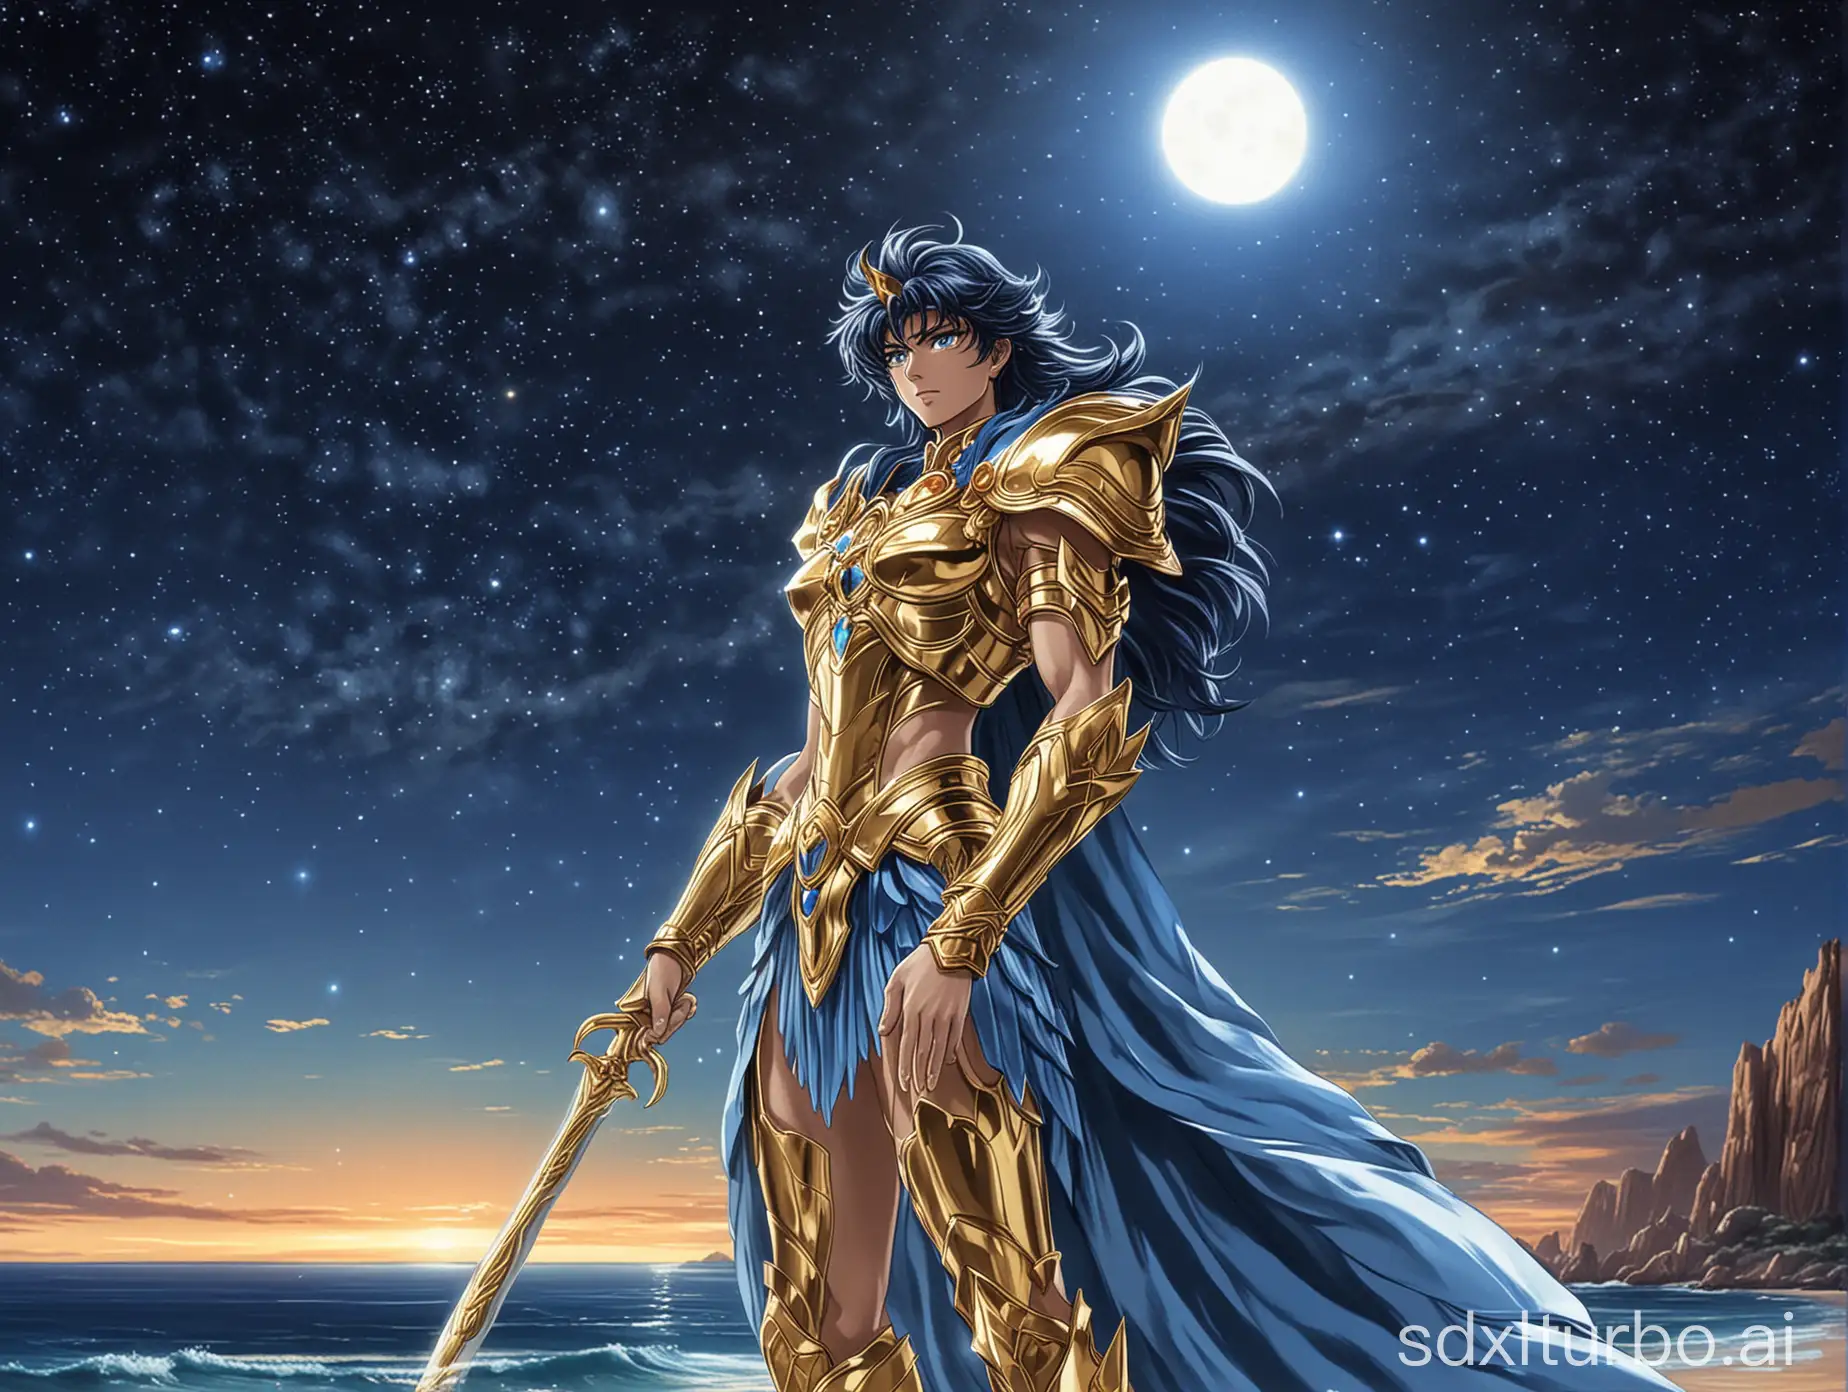 Under the starry sky, by the azure seaside, Saint Seiya is awaiting the arrival of Athena.